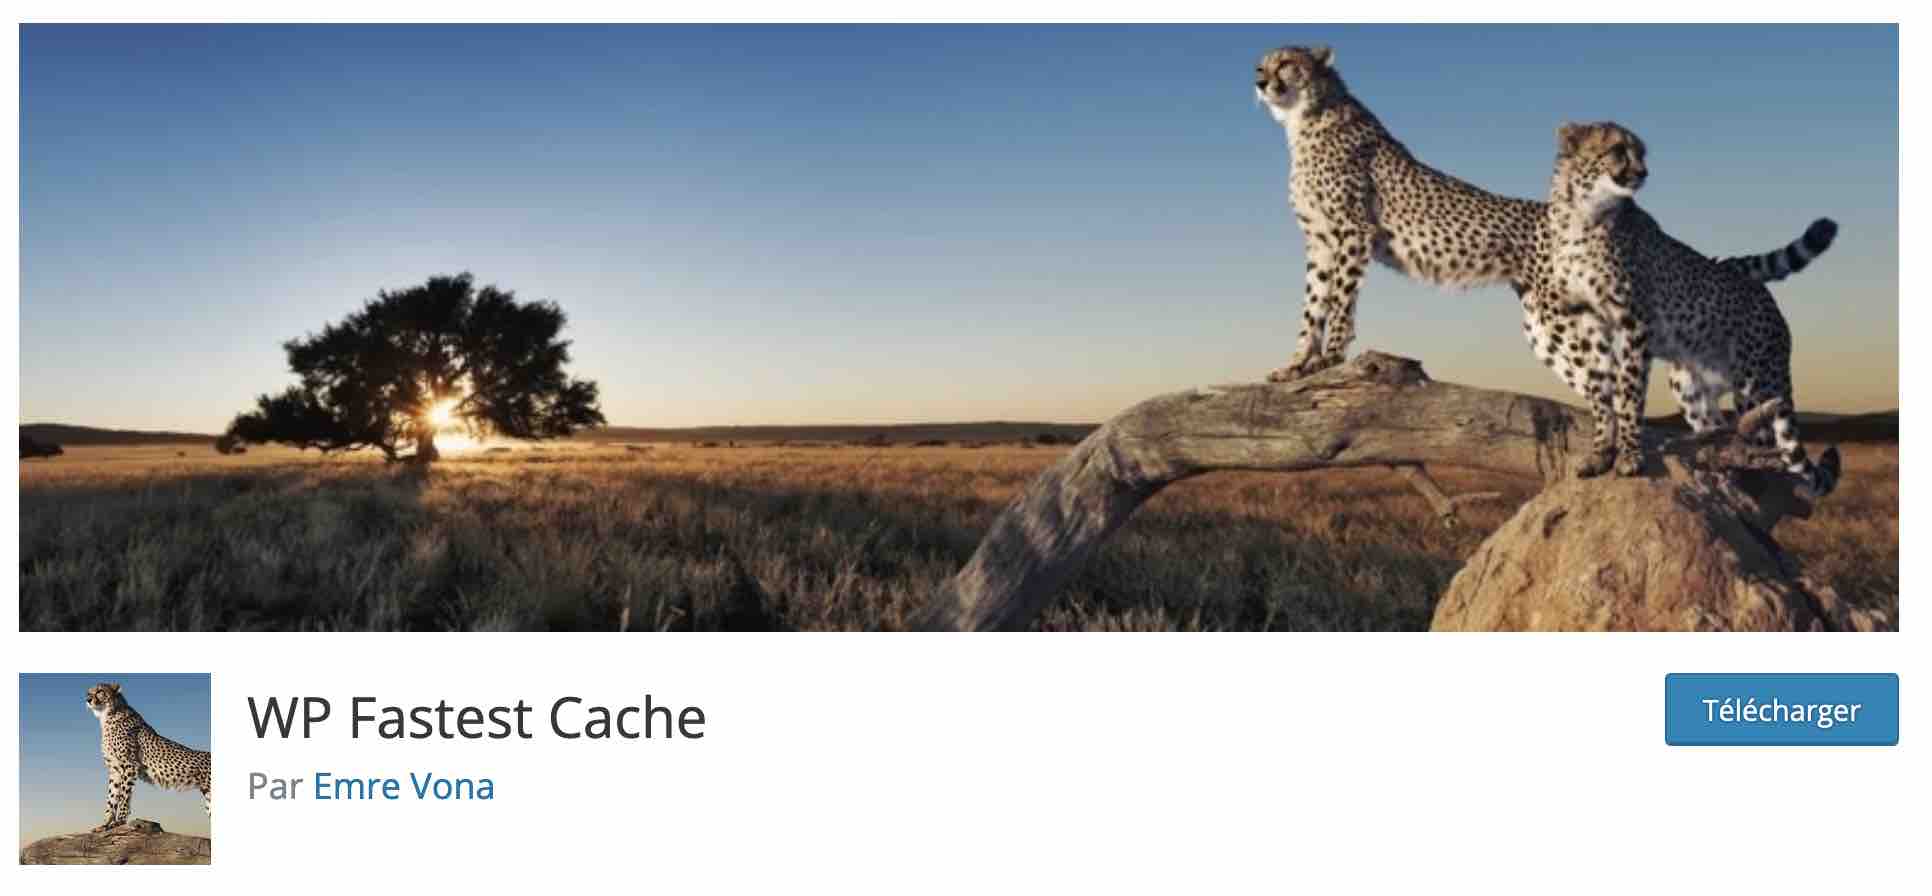 WP Fastest Cache helps speed up your pages.